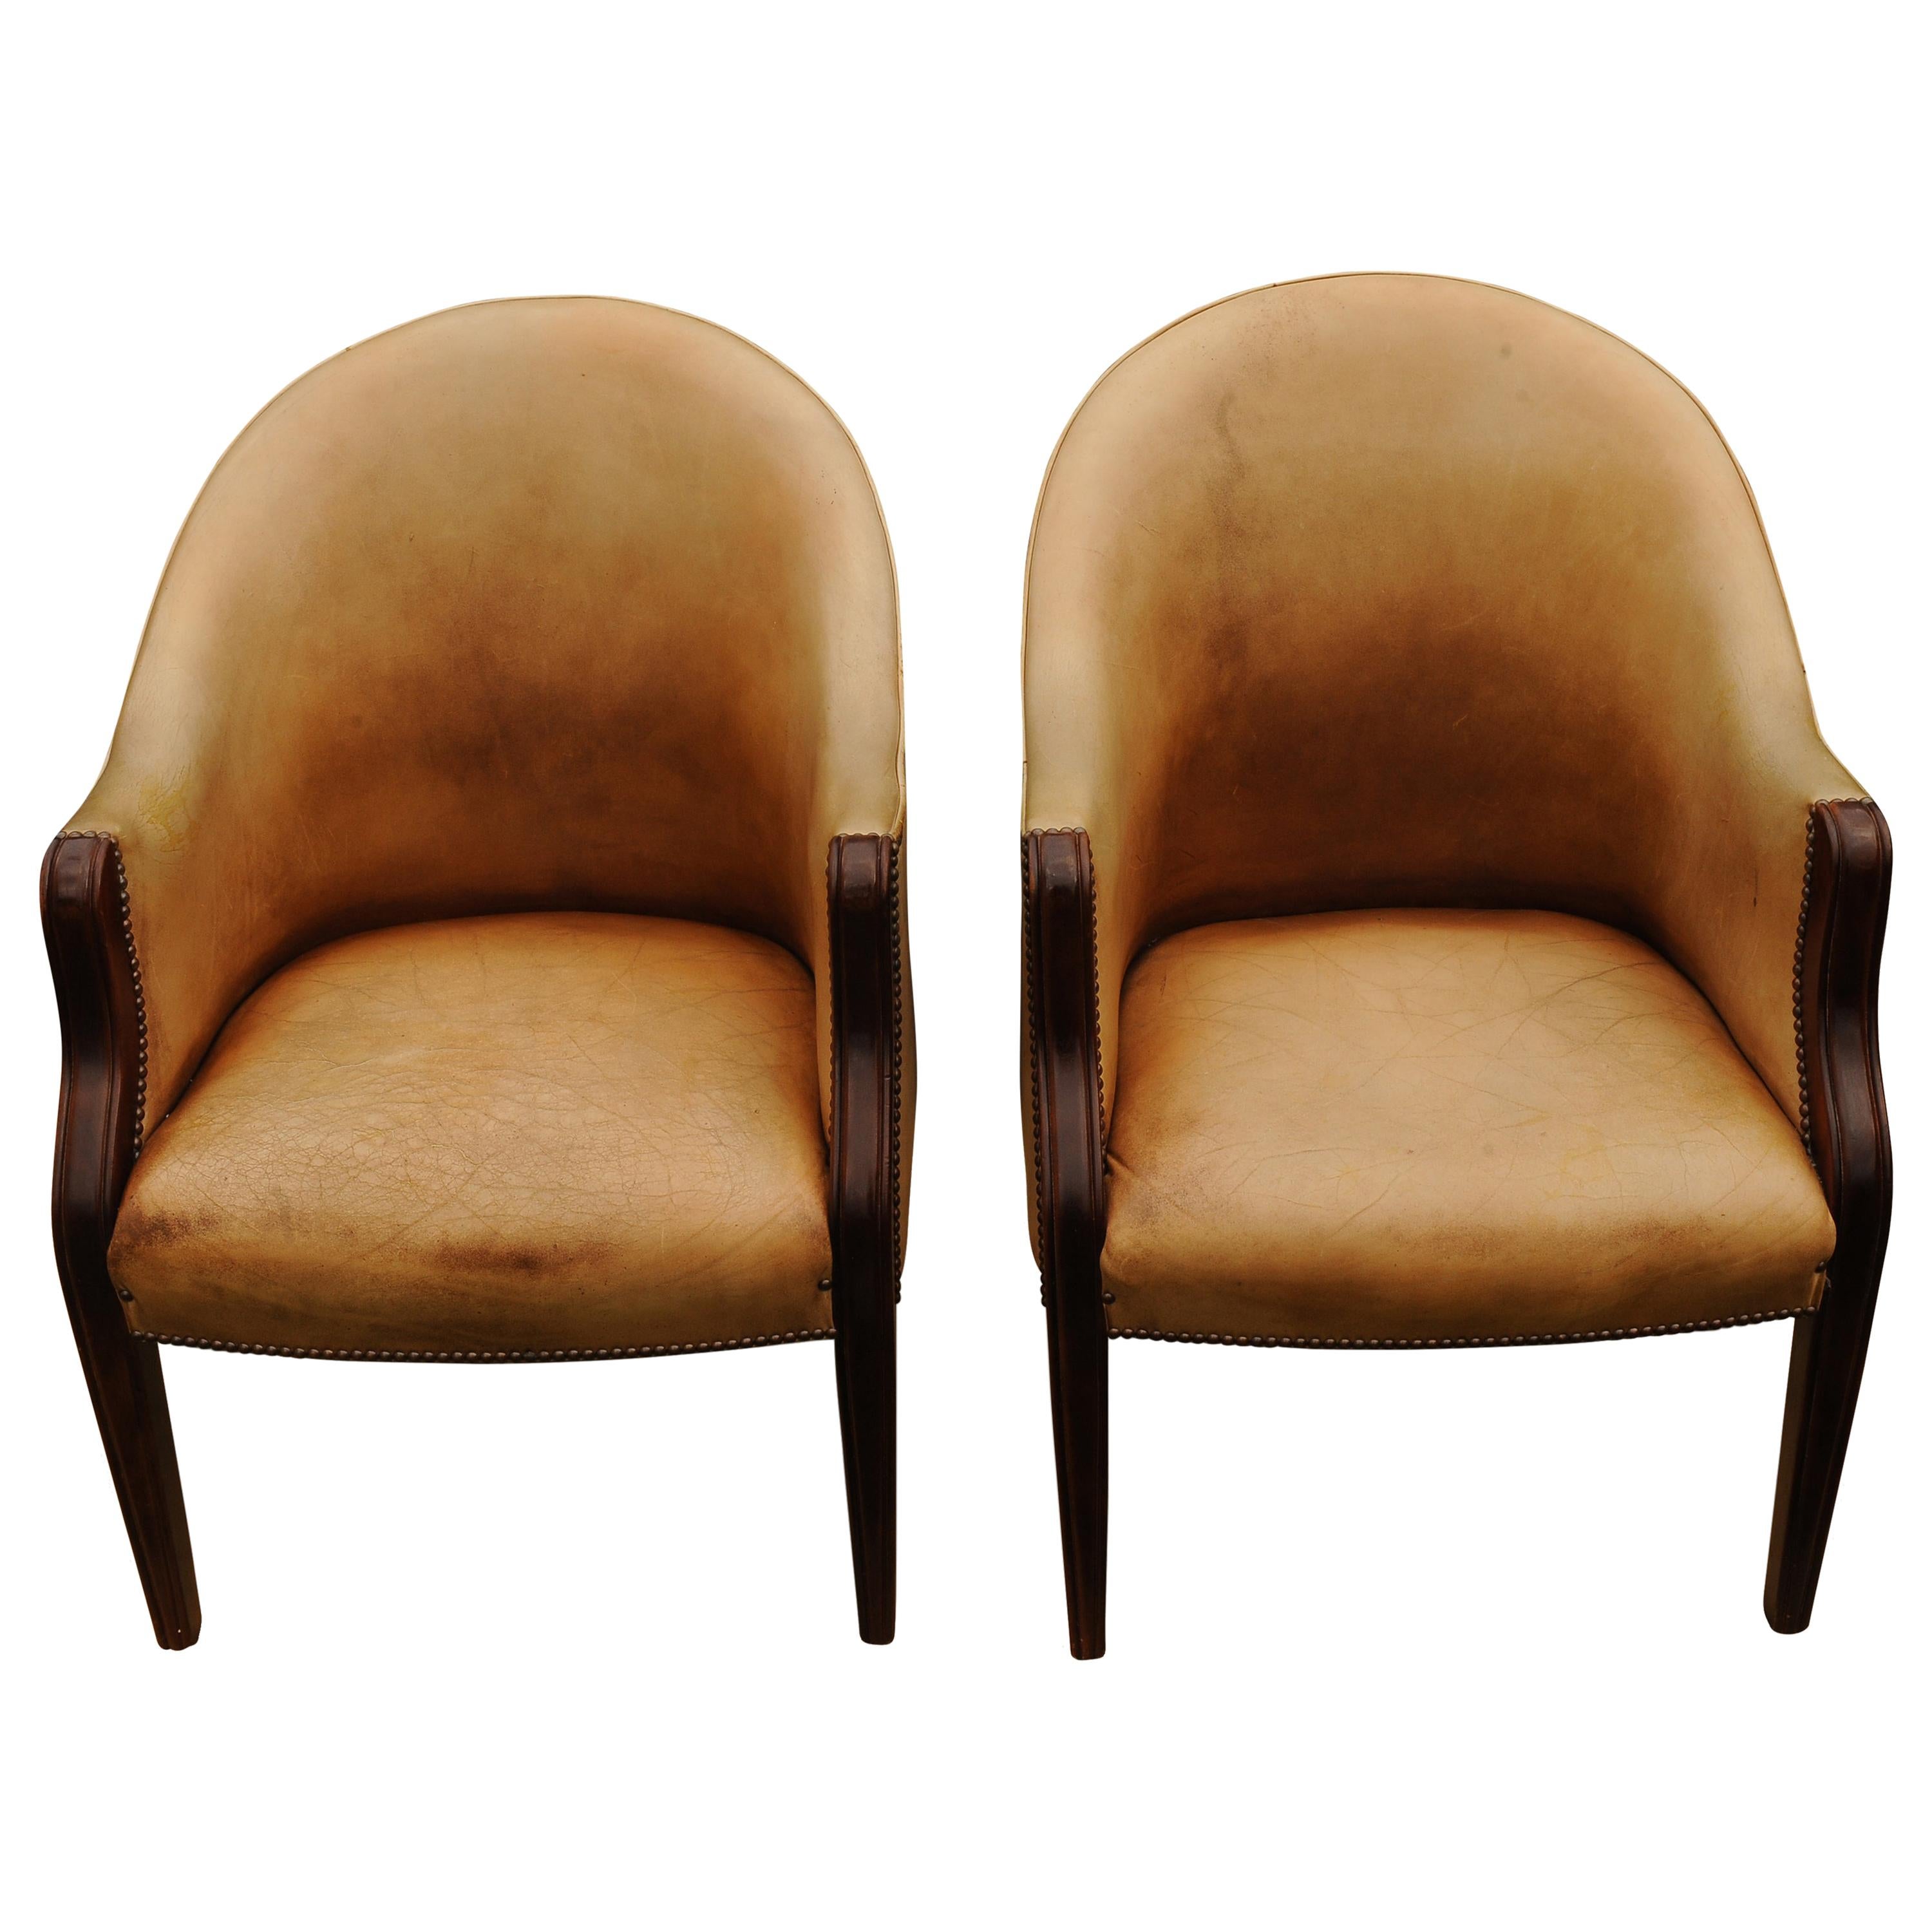 Pair of Edwardian Library Chairs in a Pale Tan Leather with Brass Stud Border